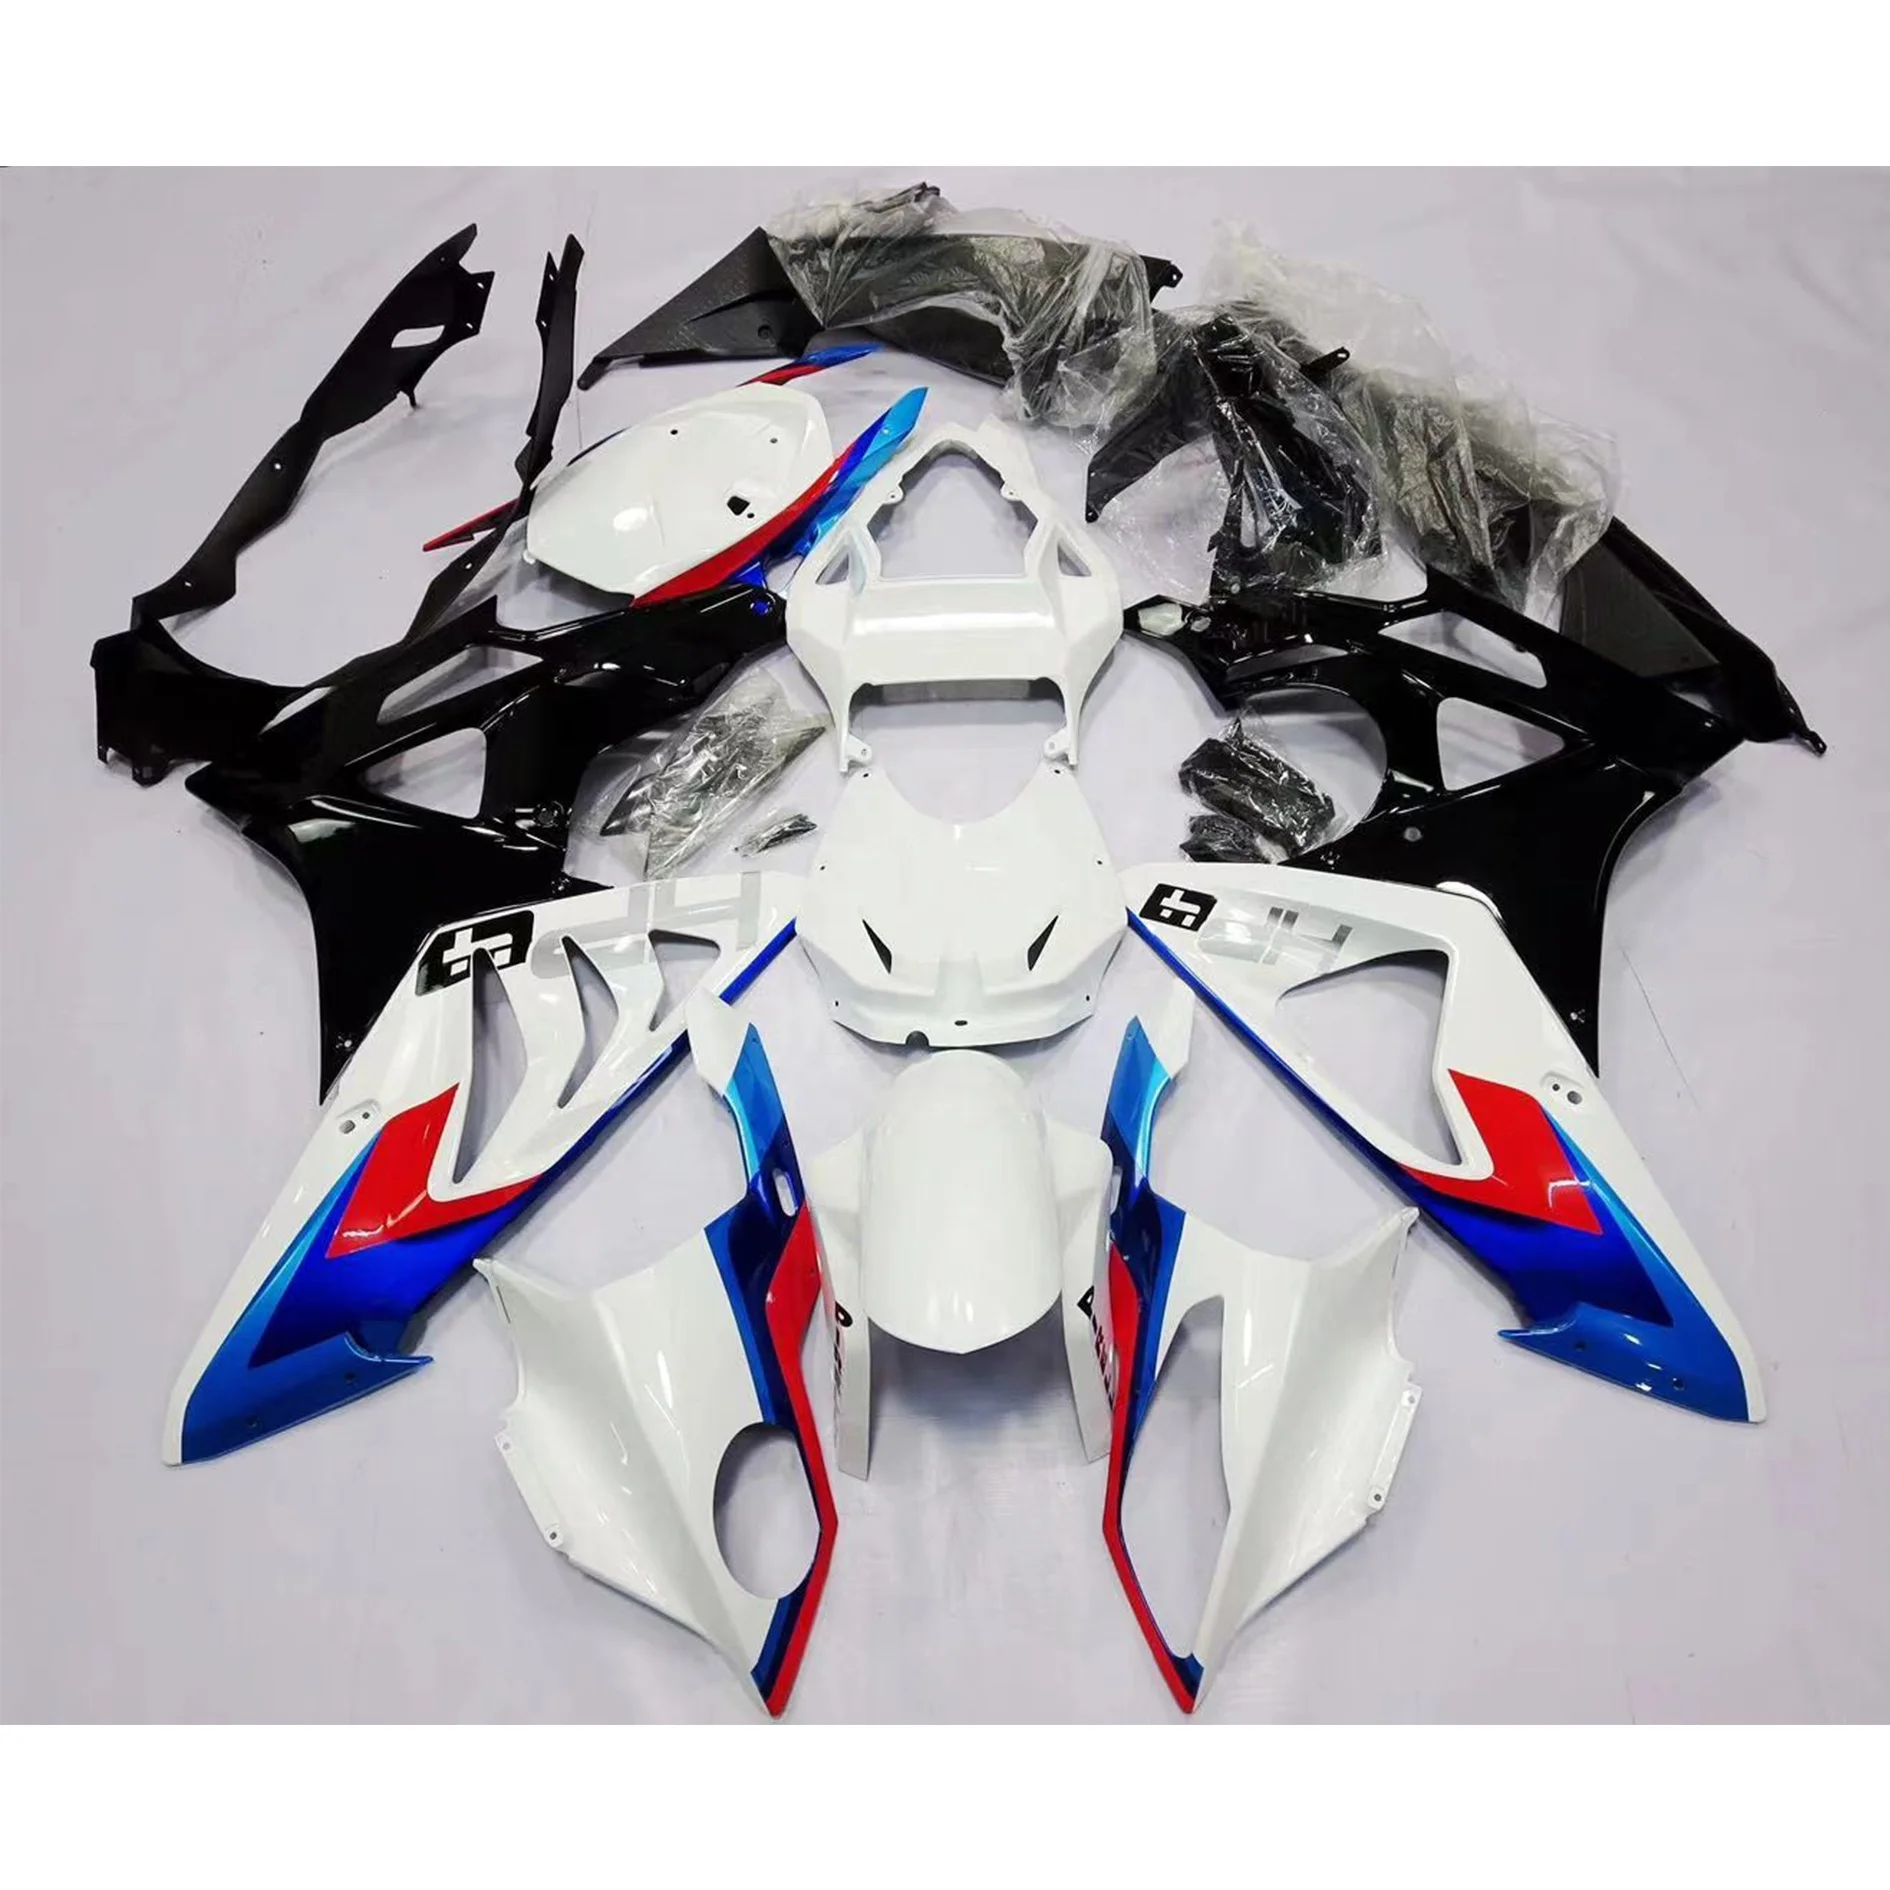 

2022 WHSC Gloss White Blue Black Motorcycle Body Kit For BMW S1000RR 2012-2014 12 13 14 Motorcycle Body Systems Fairing Kits, Pictures shown